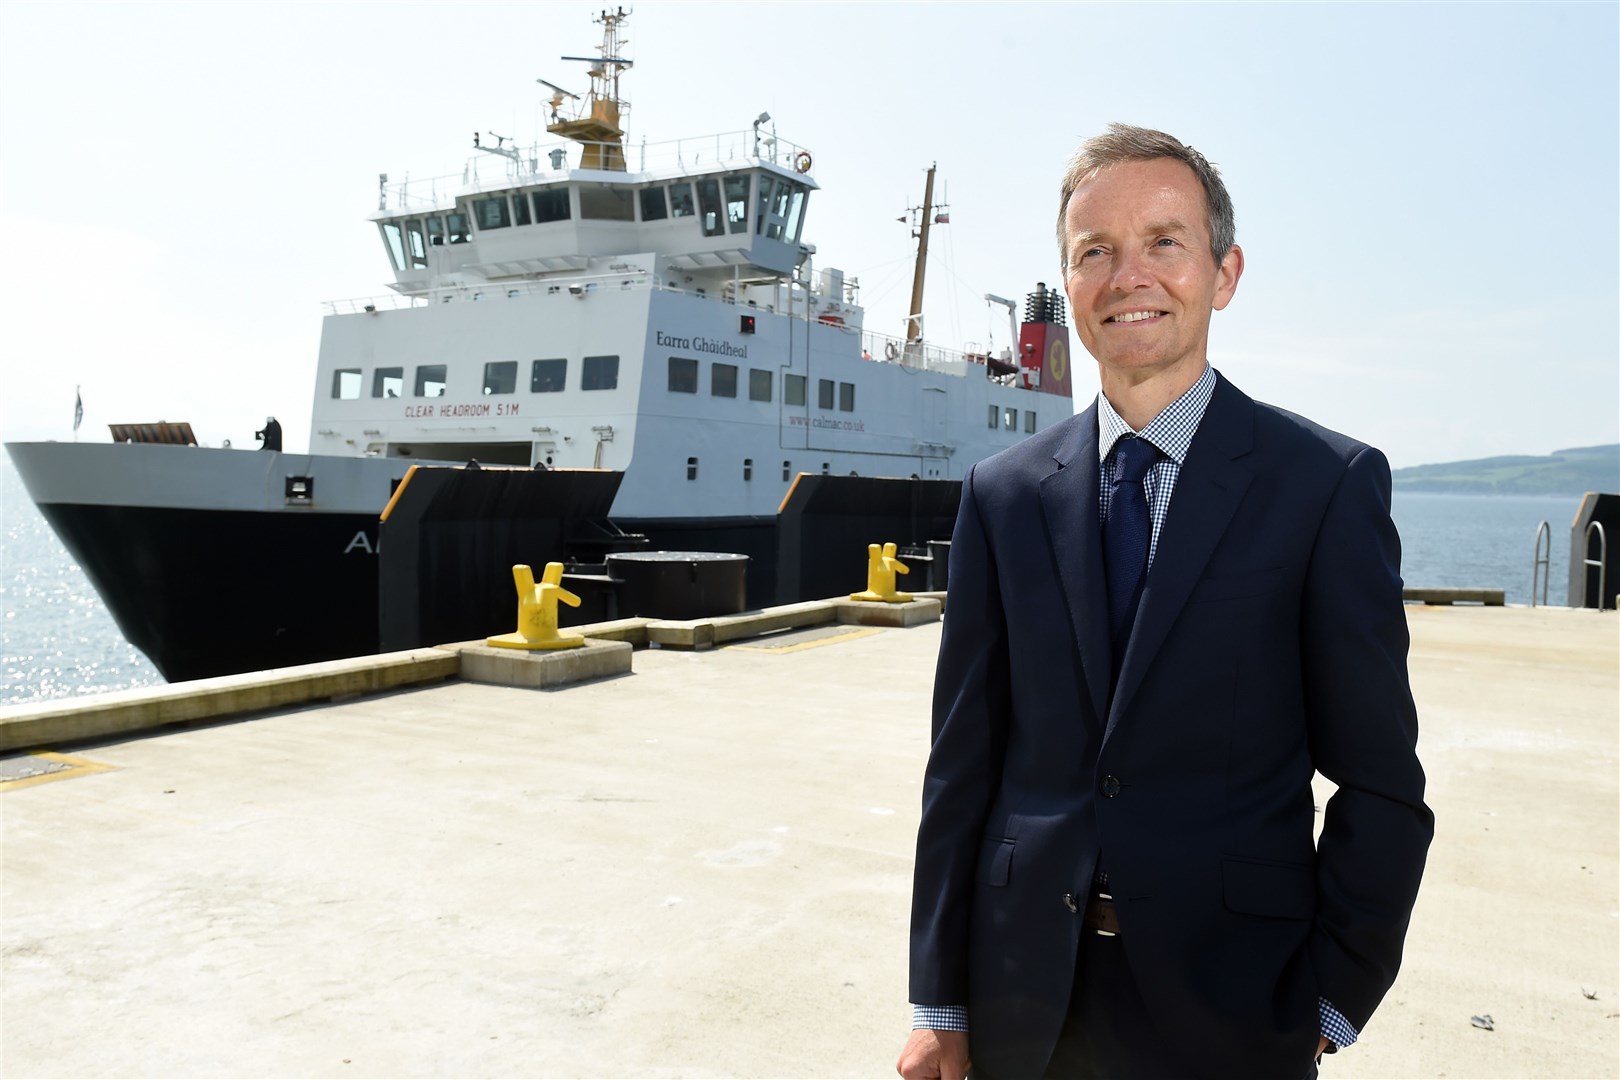 CalMac managing director Robbie Drummond: 'We have vacancies currently available, including a number of deck ratings and seaman pursers required to start in April, and would encourage anyone affected to apply as soon as possible'.